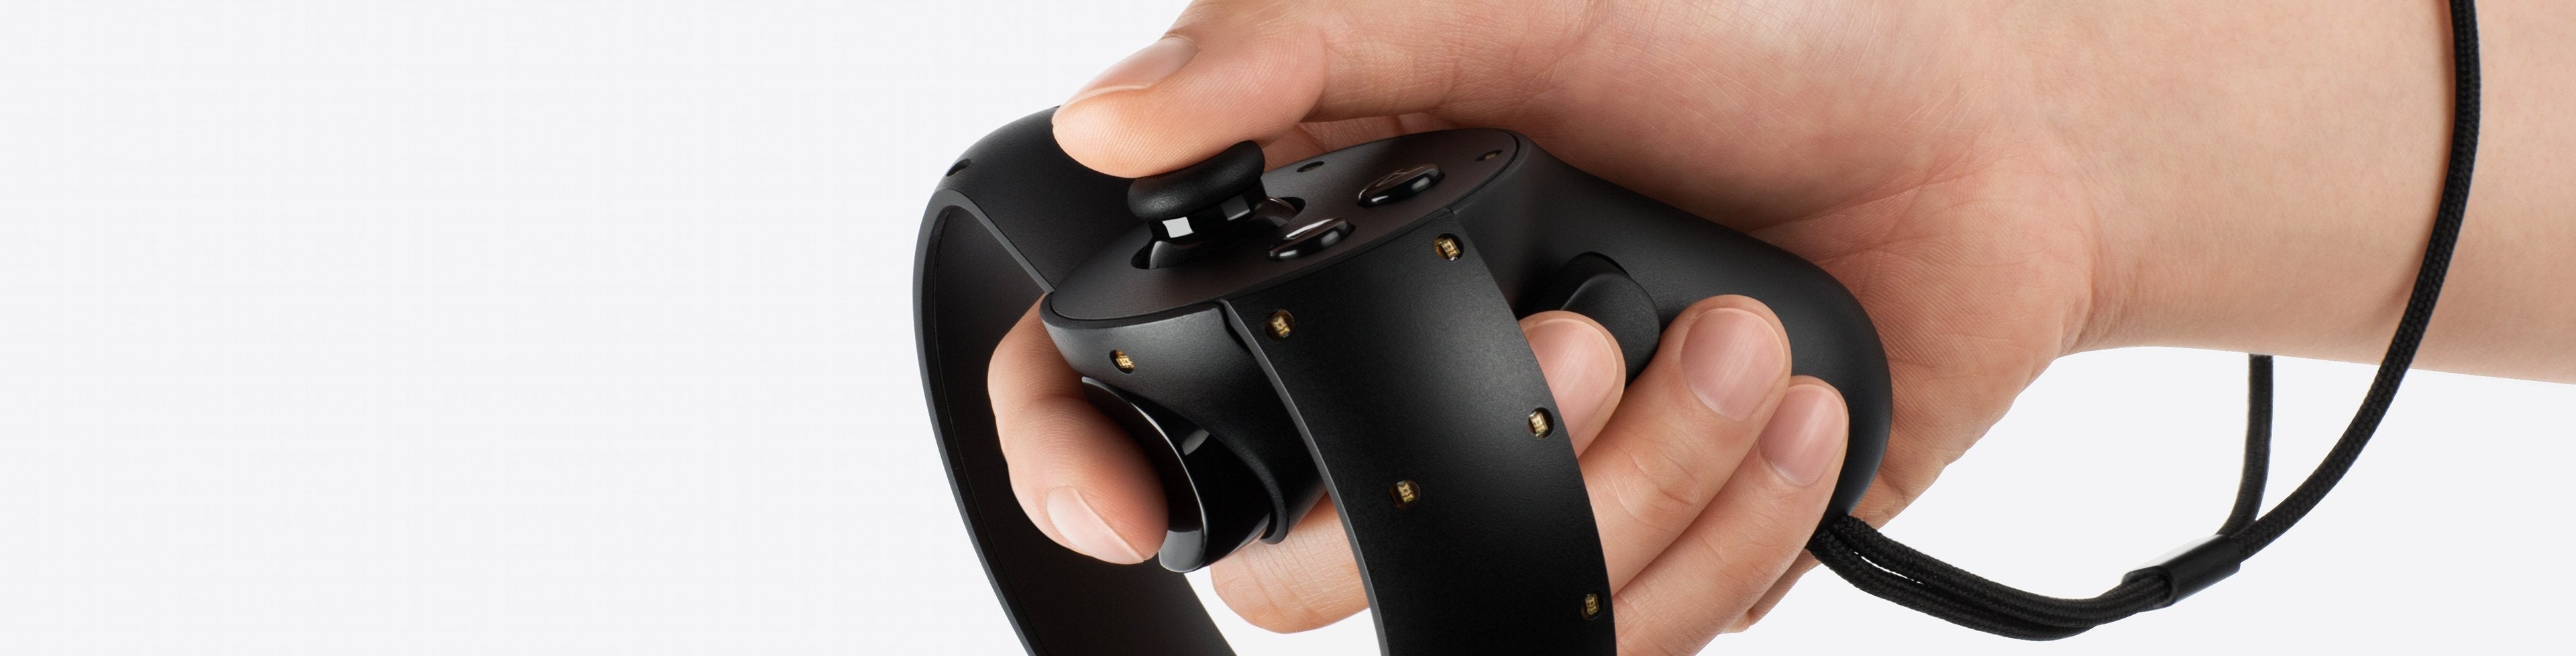 Image for Oculus Touch is the gold standard in VR control